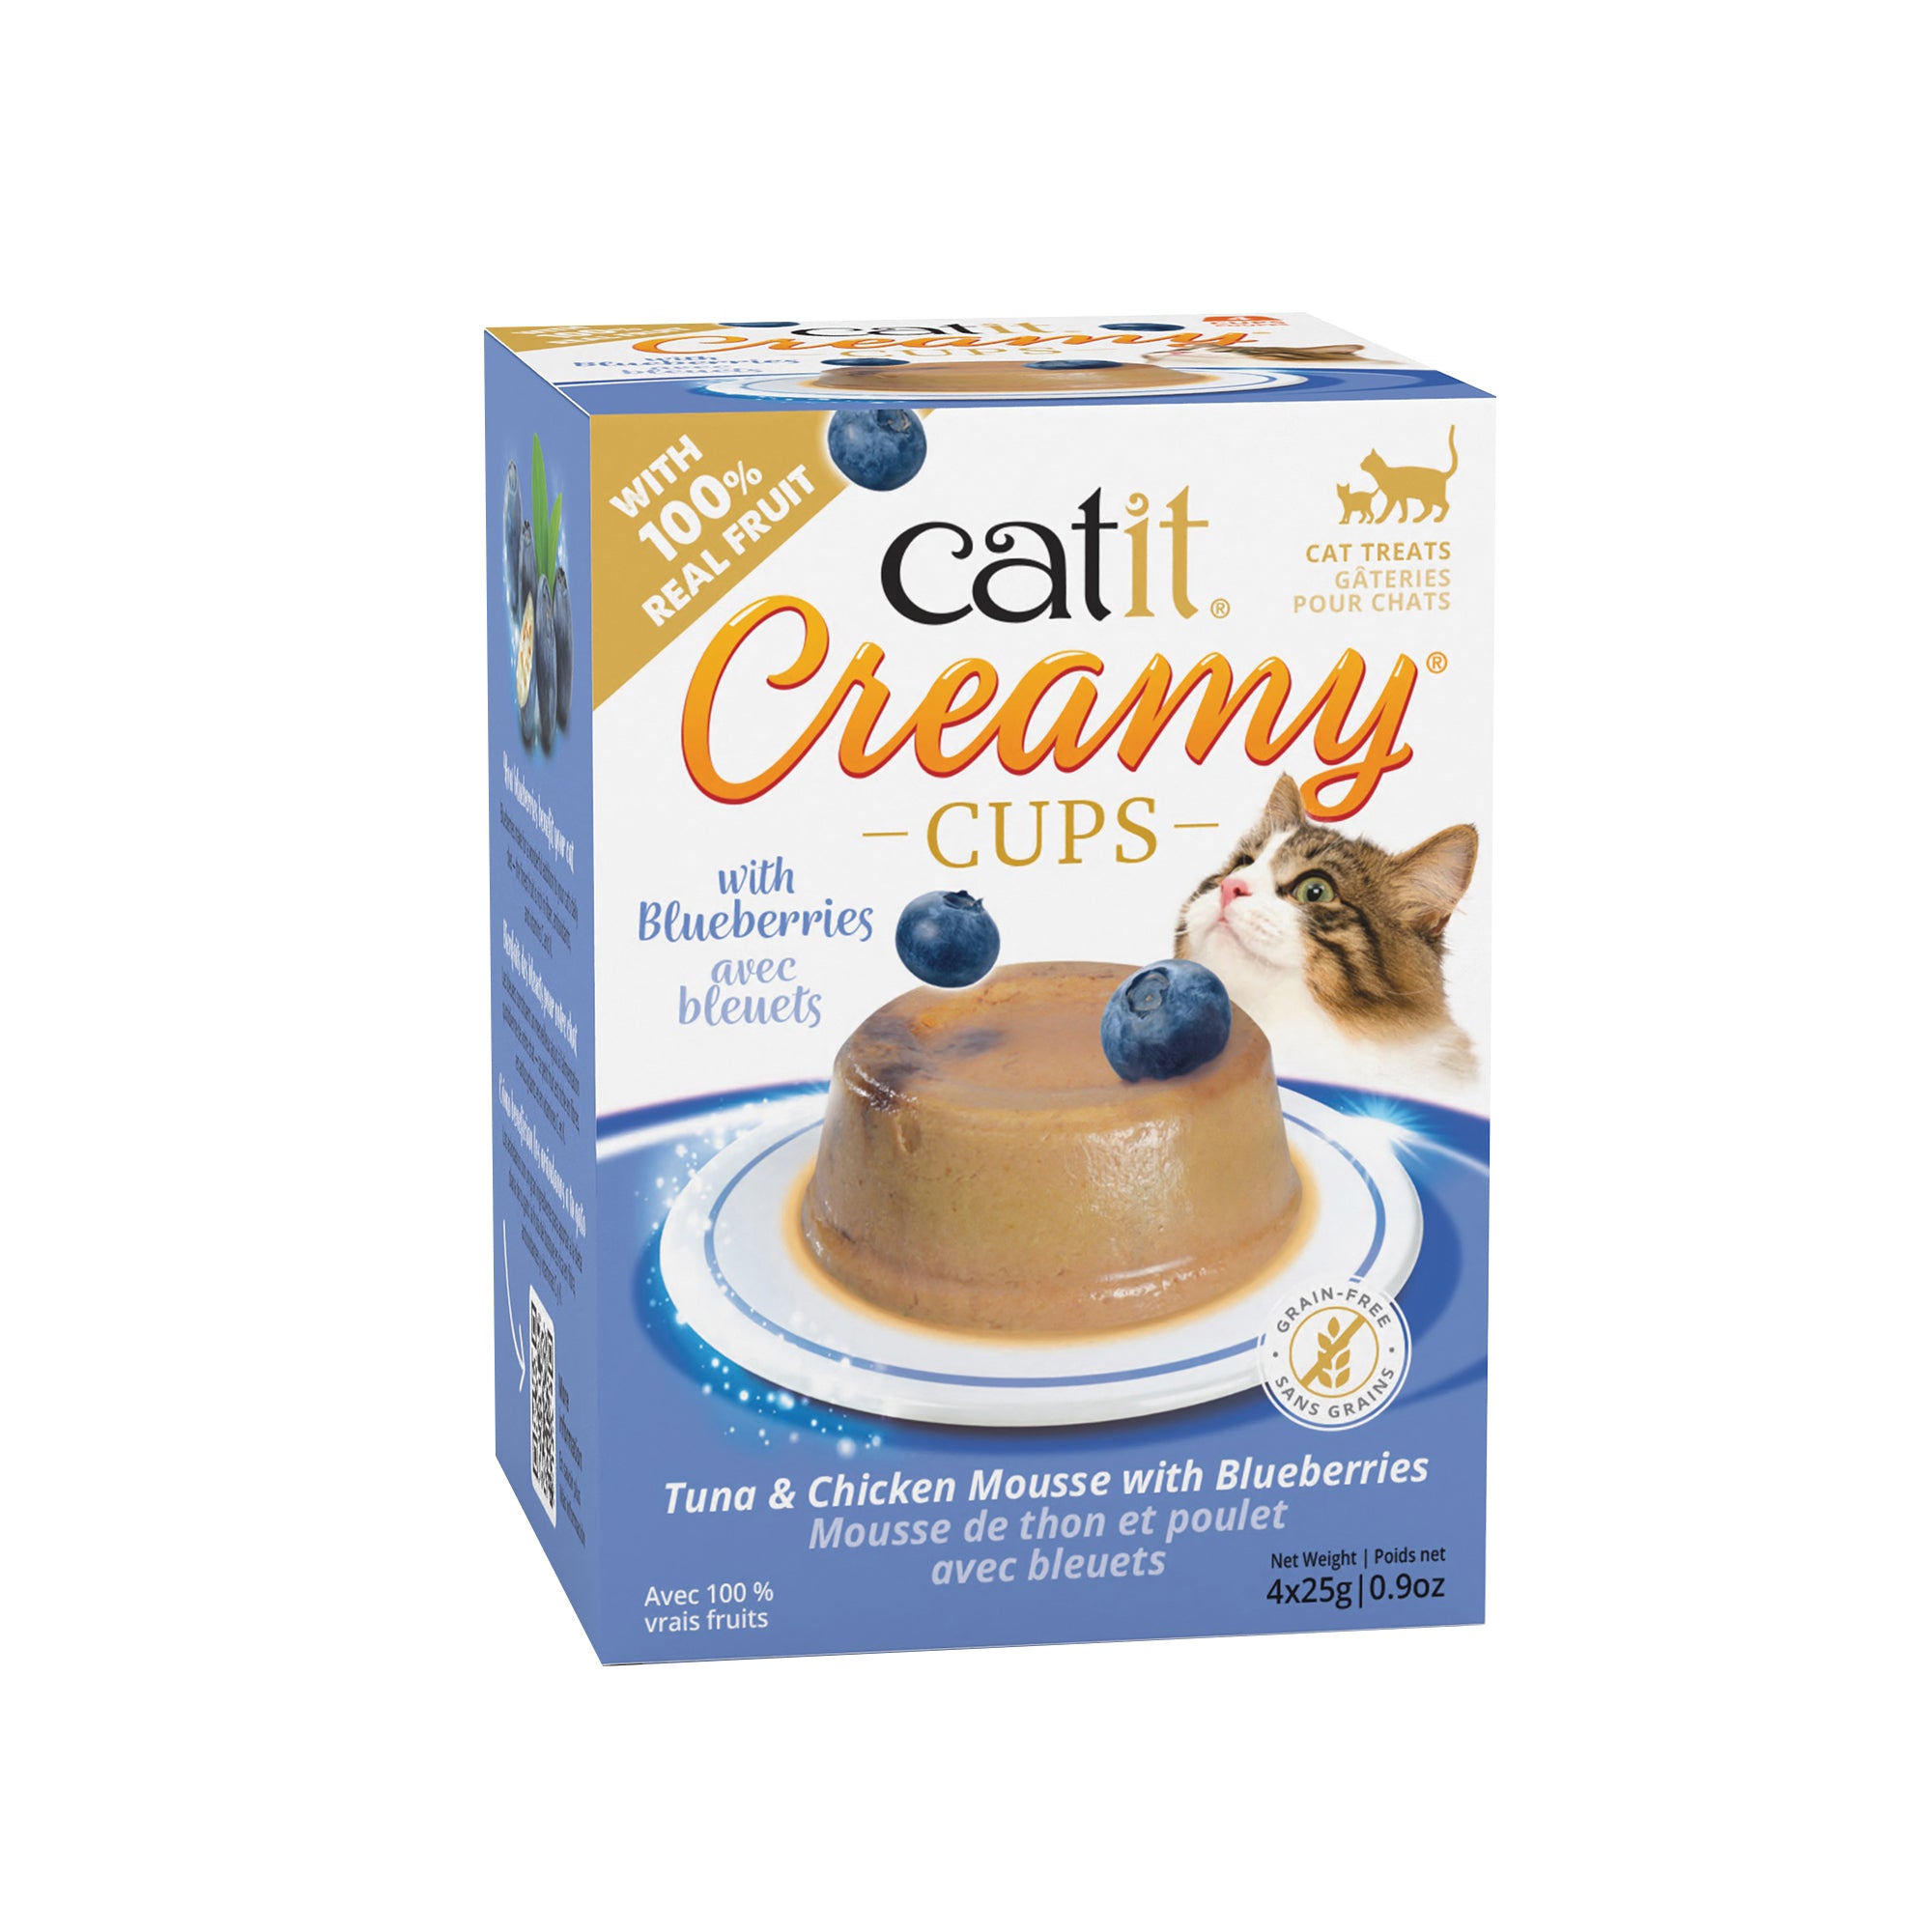 Catit Creamy Cups - Tuna & Chicken Mousse with Blueberry - 4 x 25g